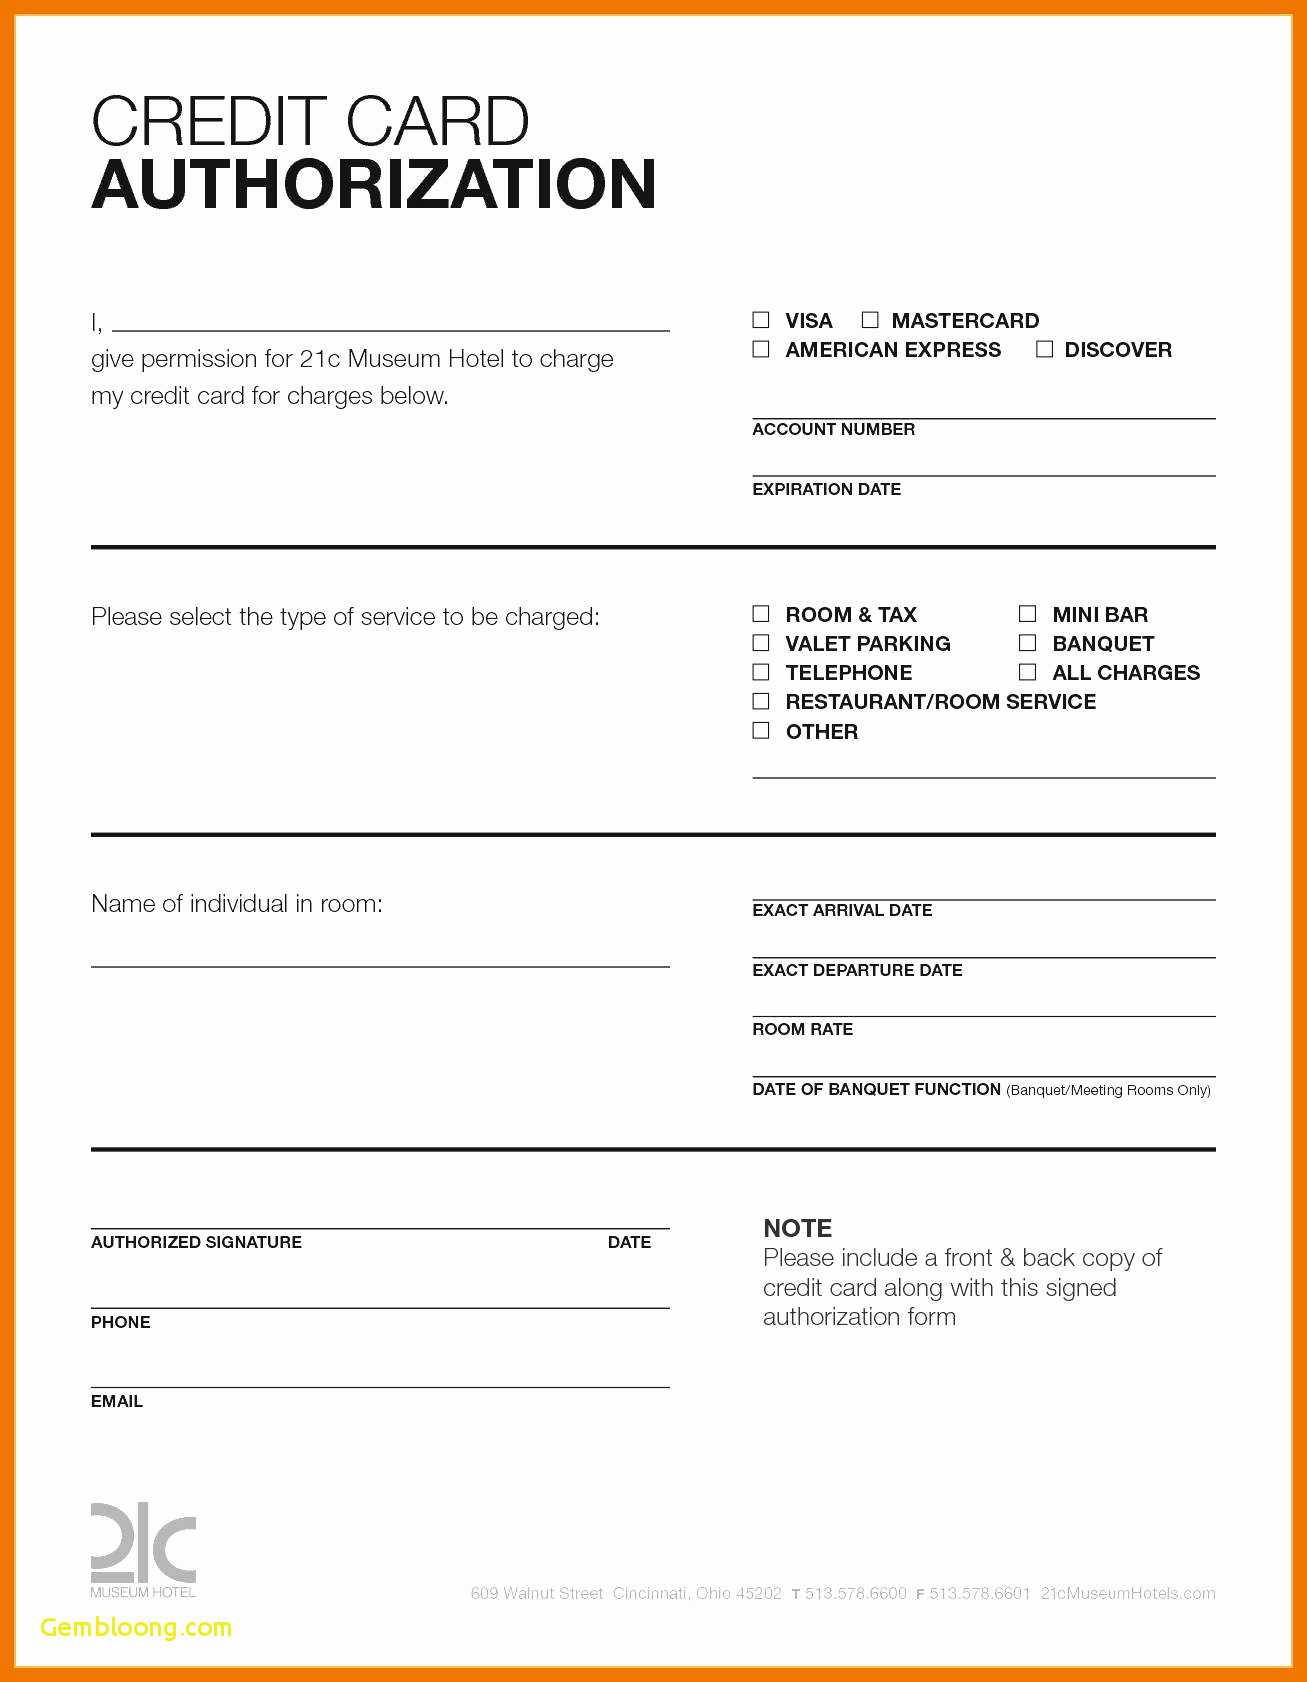 004 Canadian Credit Card Authorization Form Template Ideas With Credit Card Authorization Form Template Word